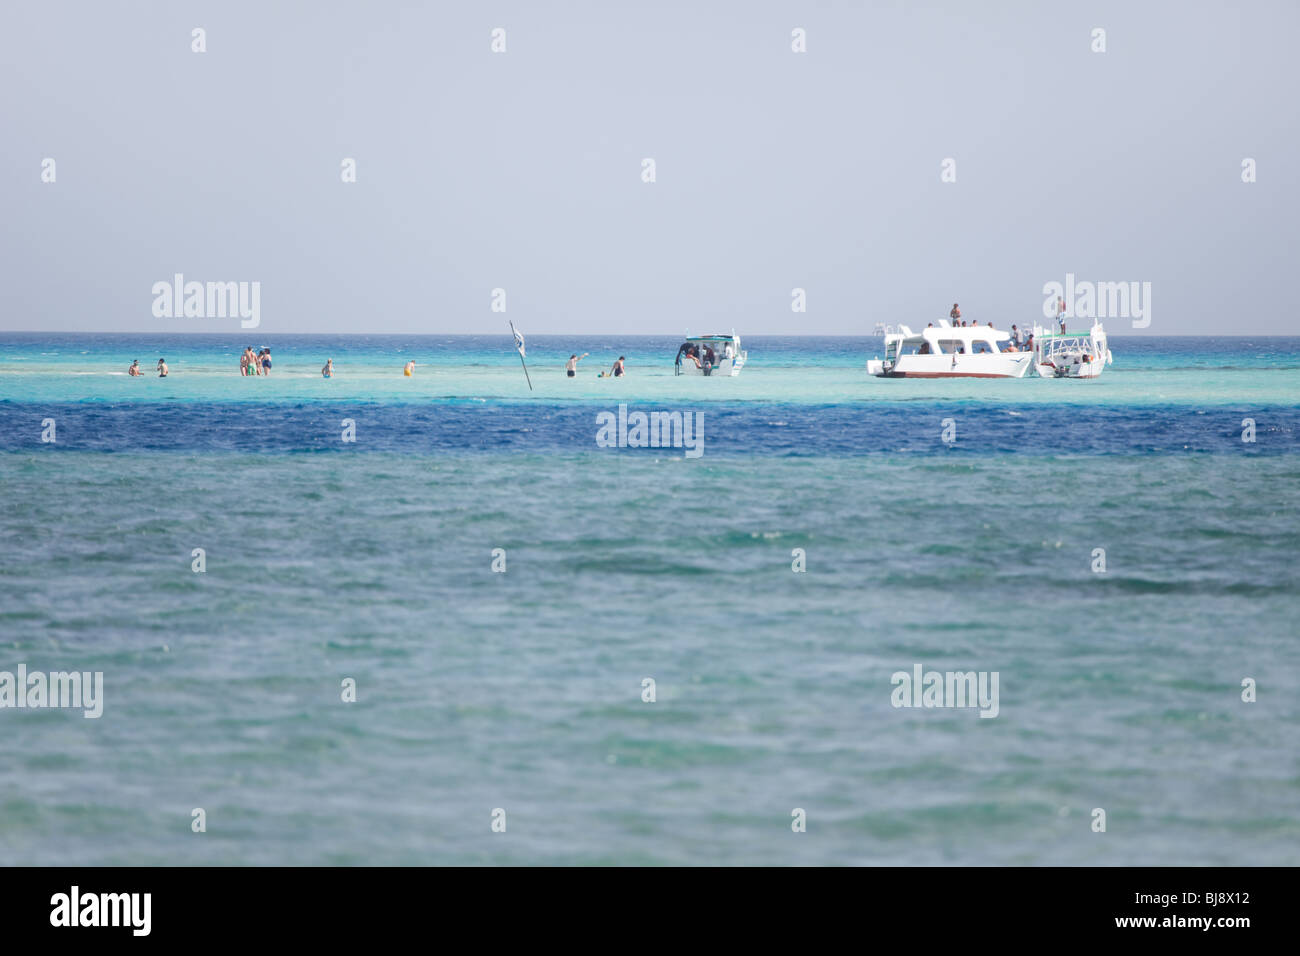 People walking and snorkeling in shallow water Stock Photo